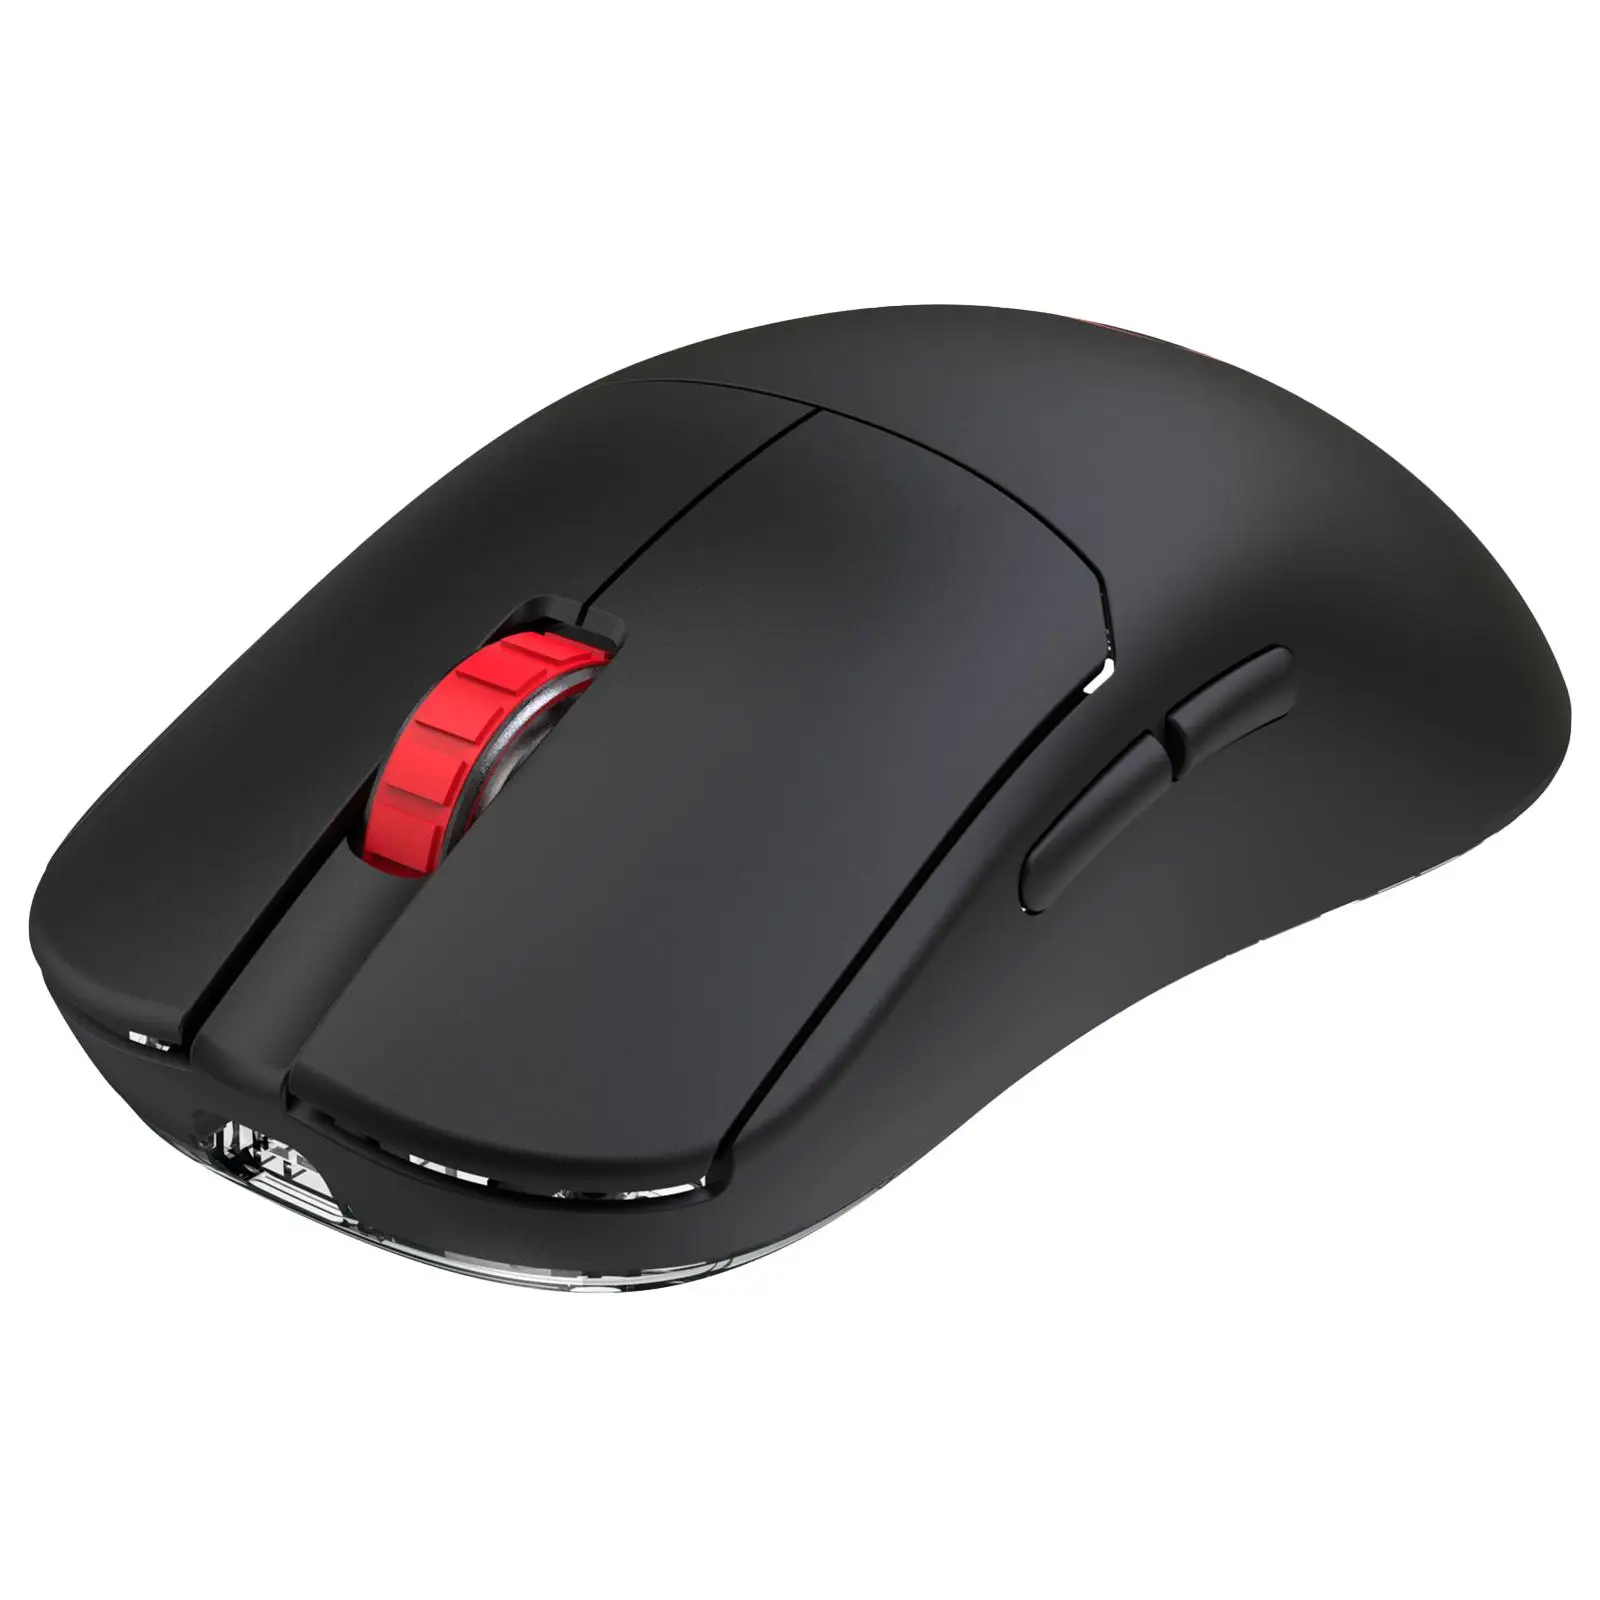 Wired Wireless Gaming Mouse 10000 DPI Ergonomic Mice for PC Computer Laptop